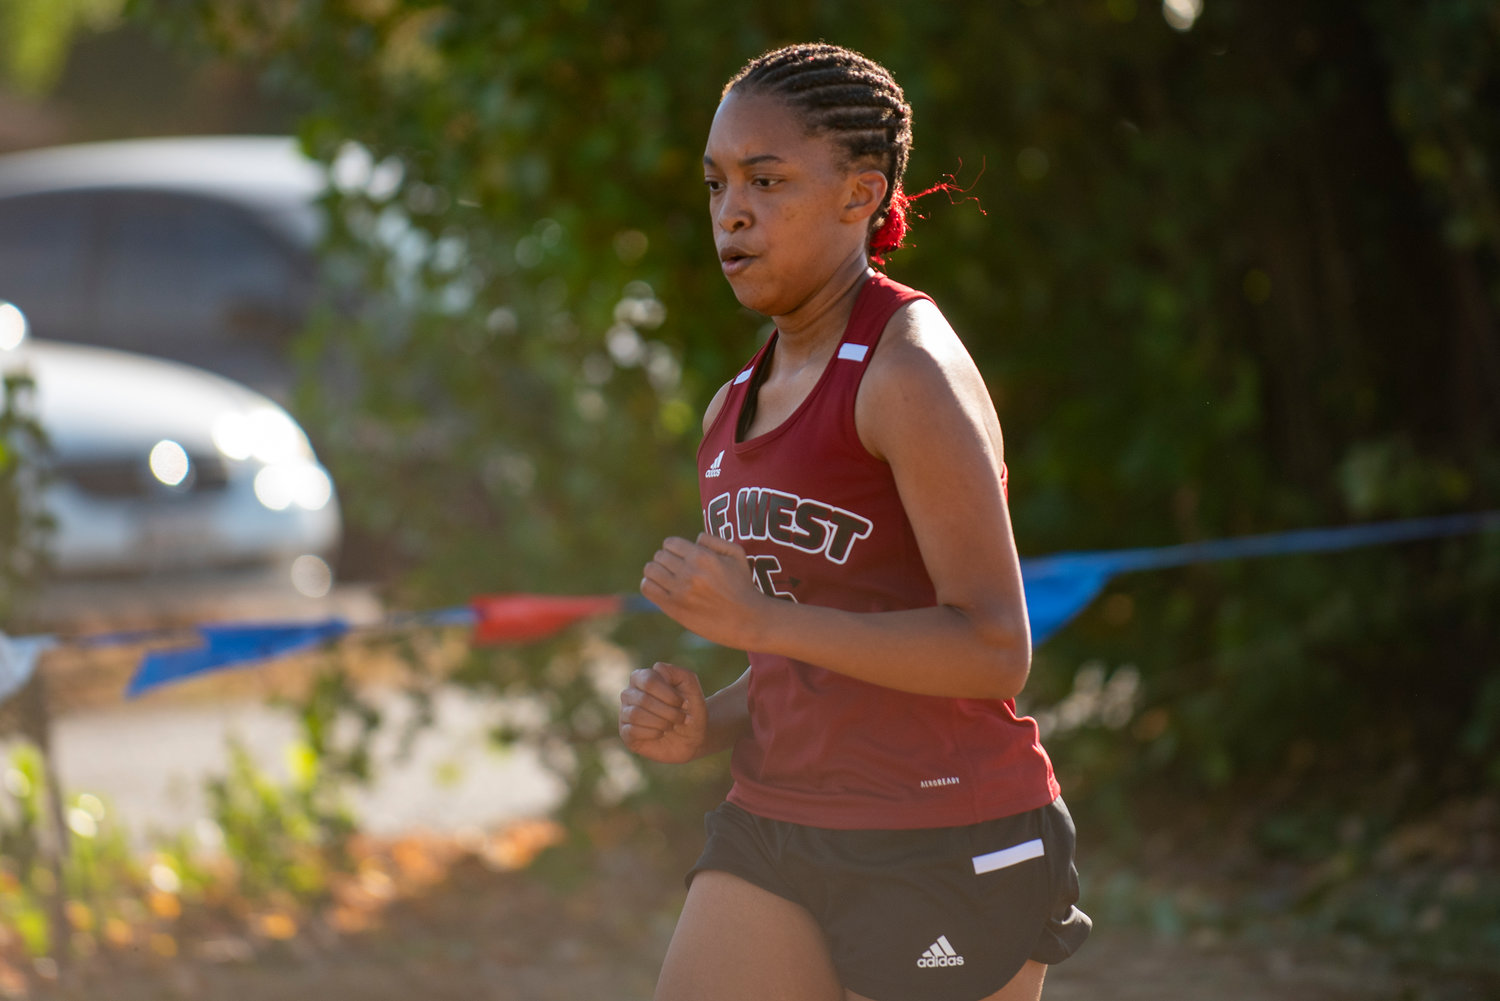 W.F. West's Kaitlin Elmore crosses the finish line on Wednesday.